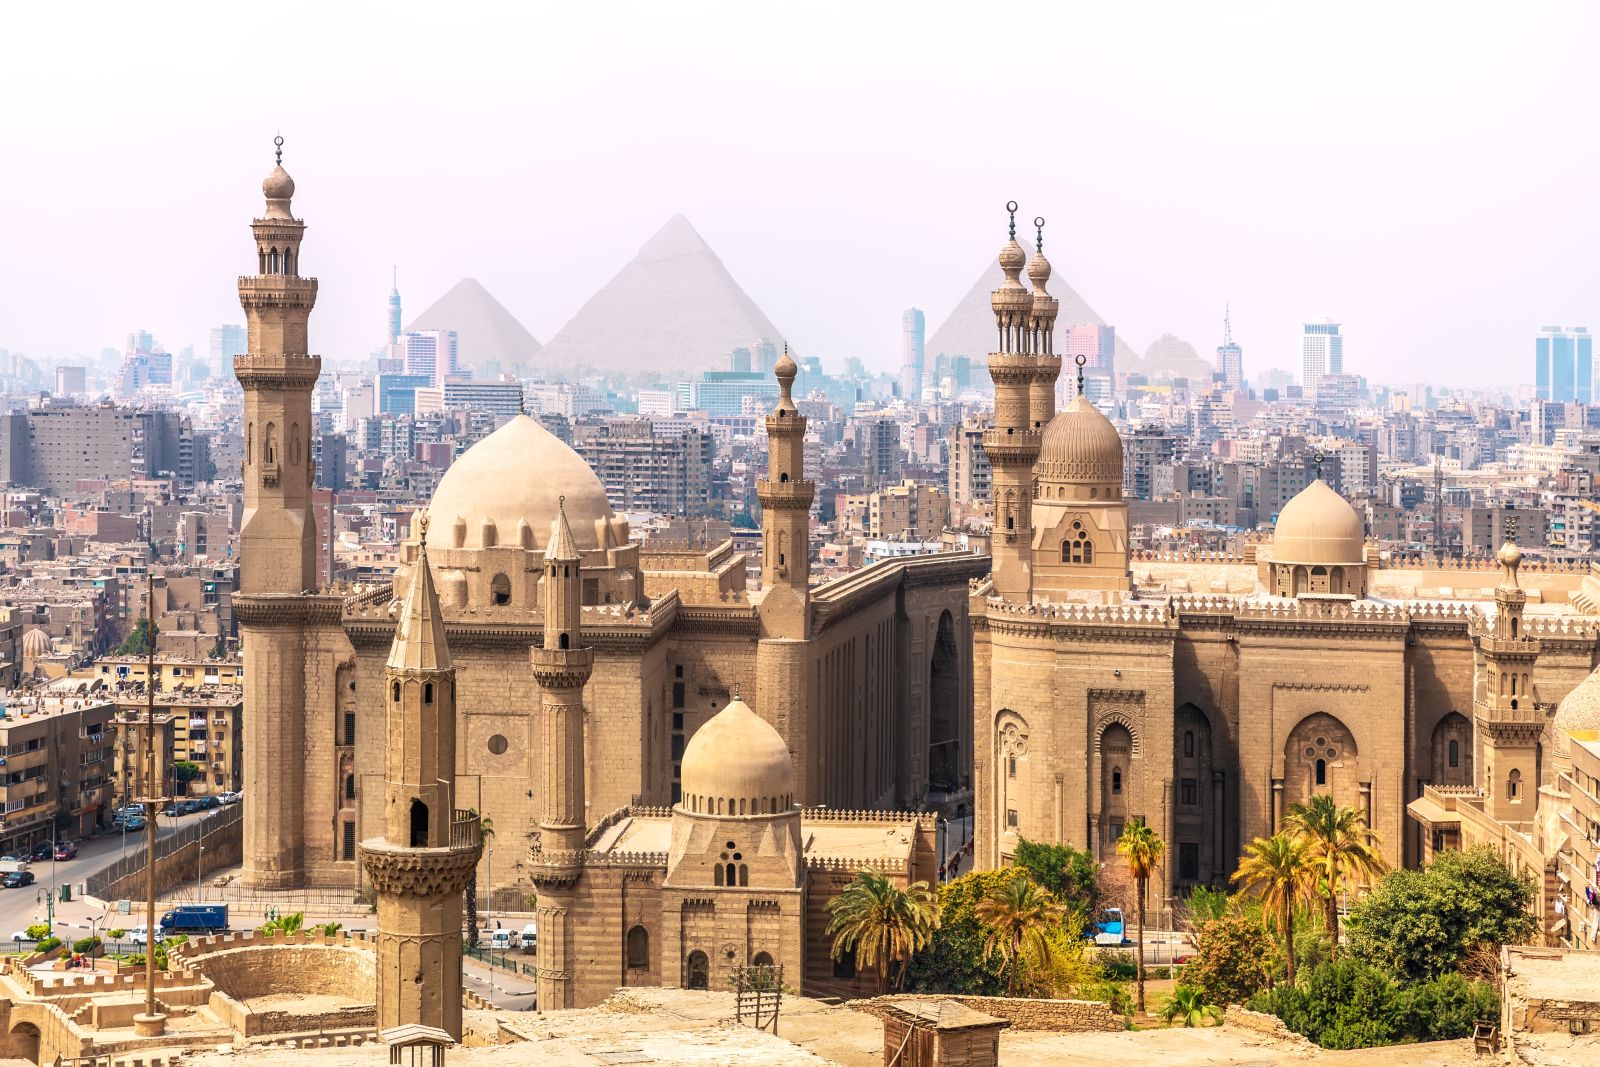 View of Cairo cityscape and Sultan Hassan Mosque